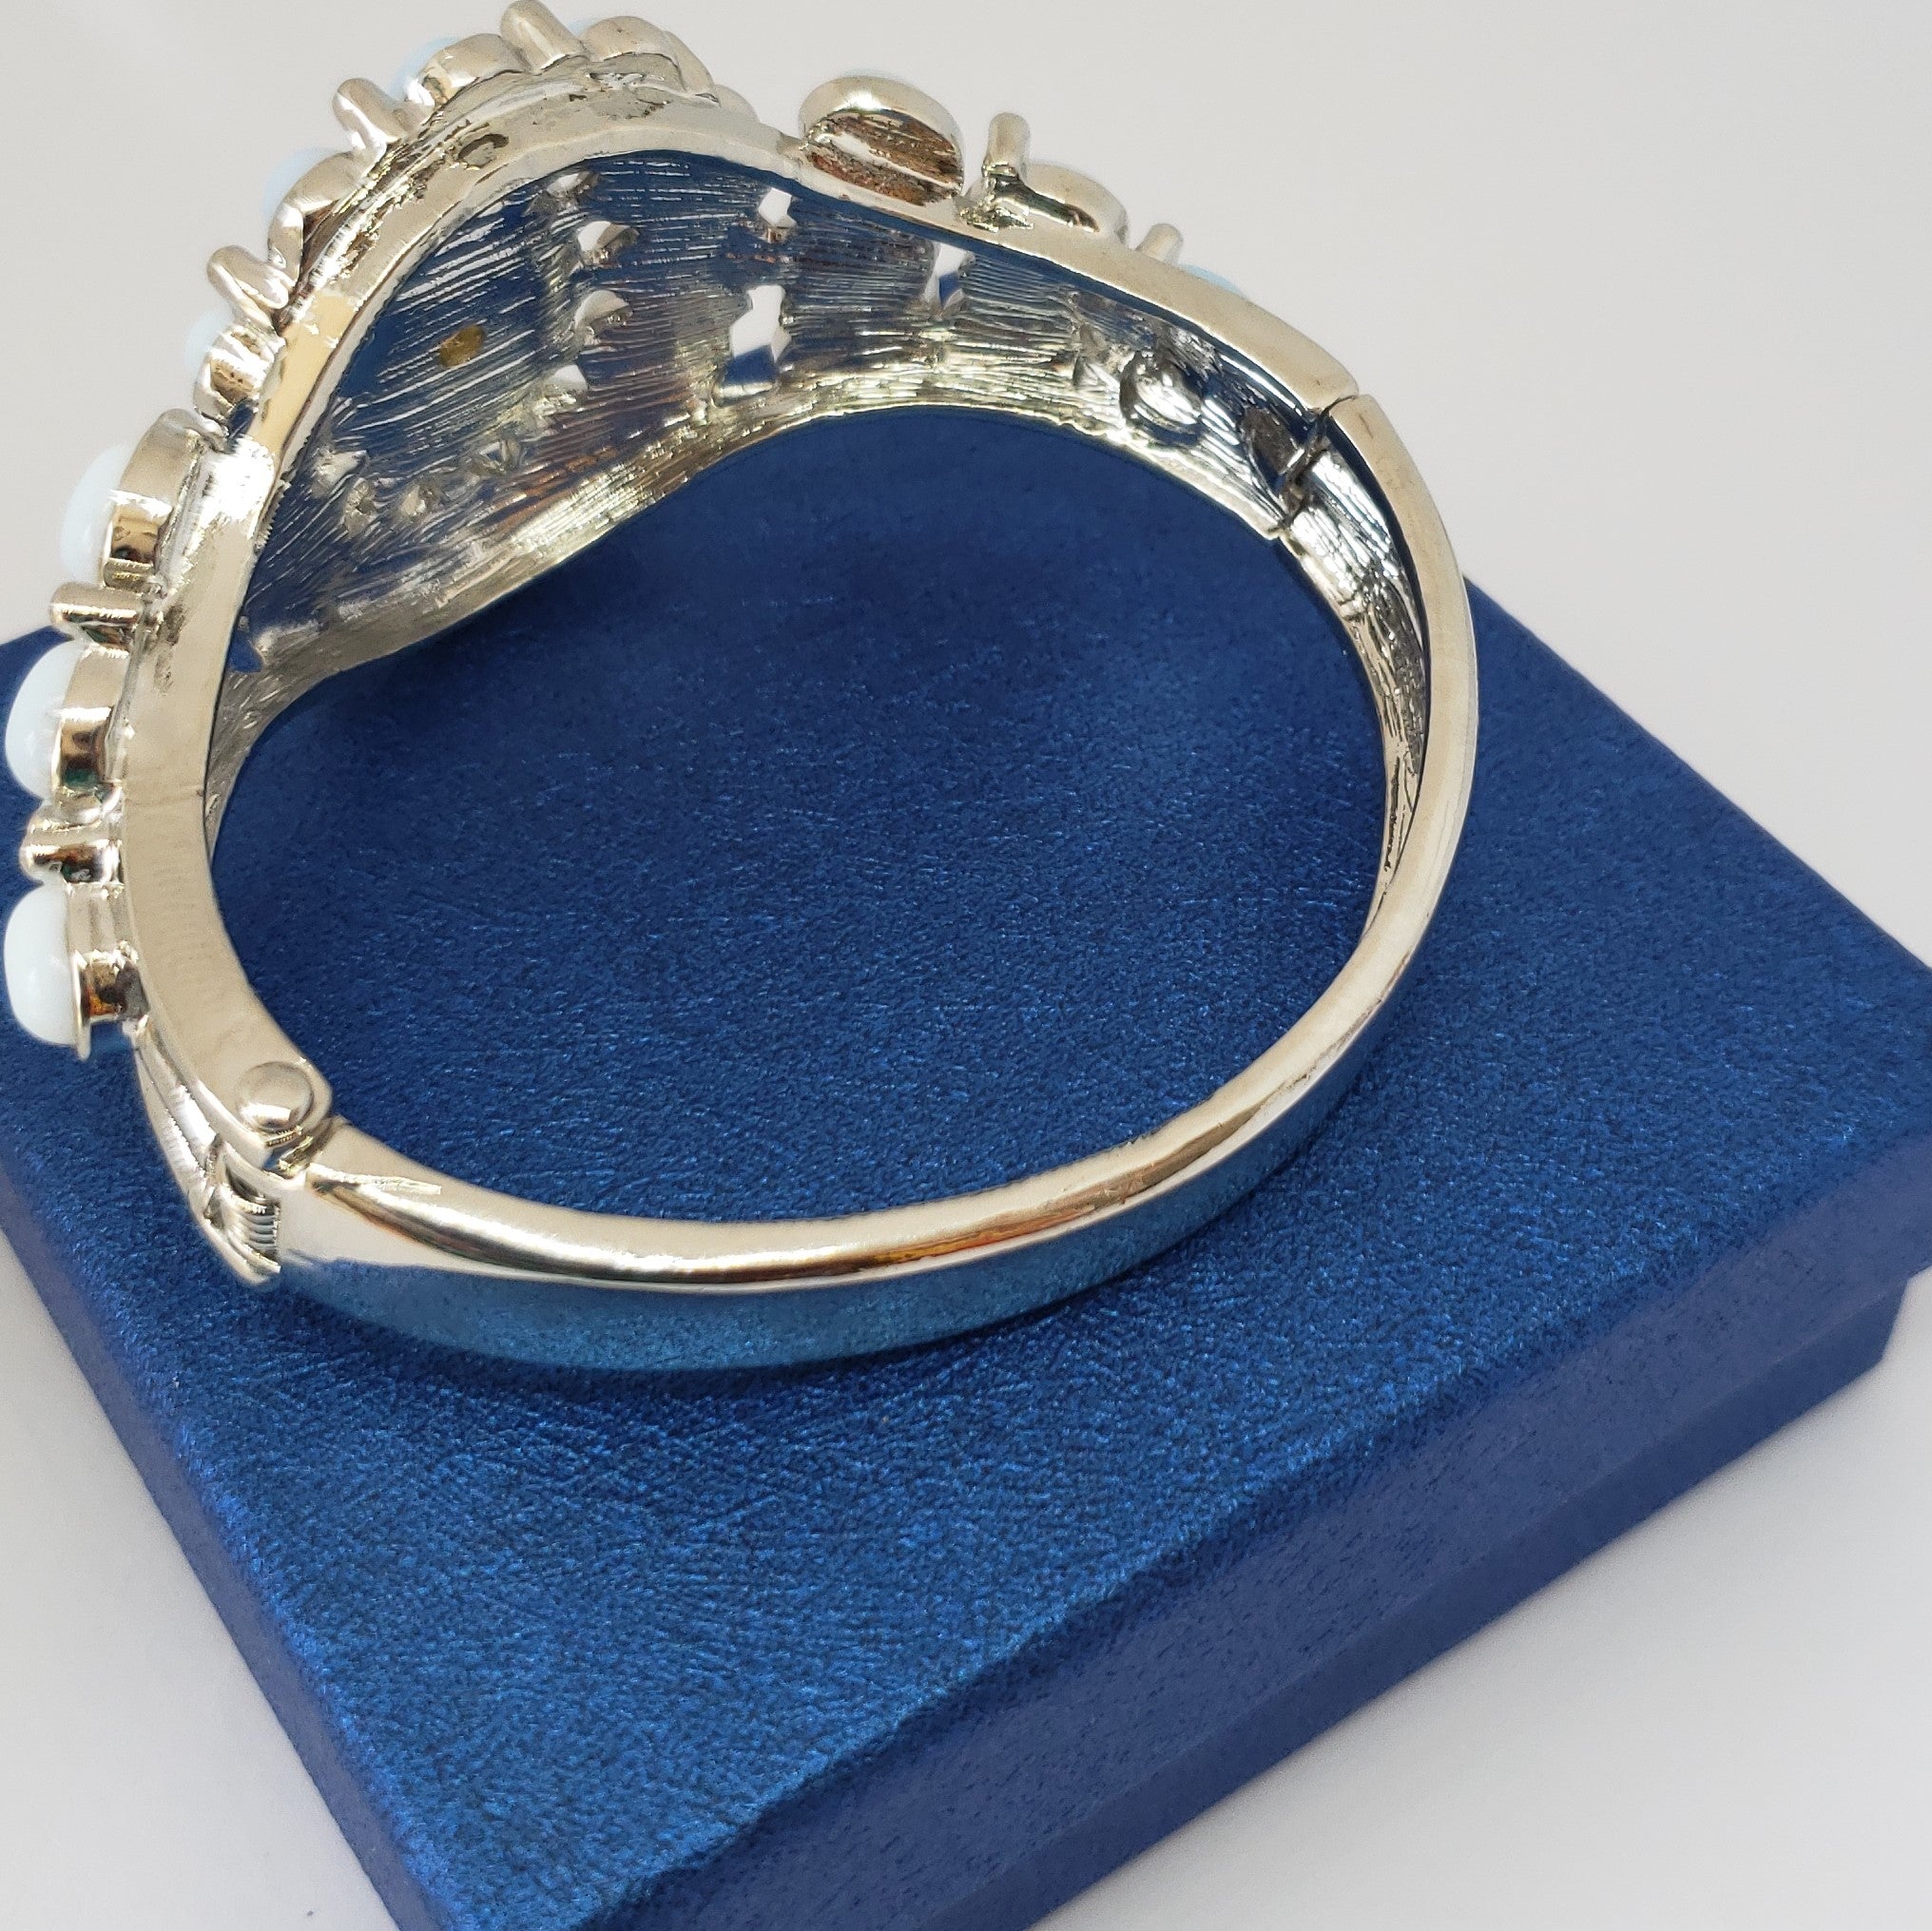 Delightful Opalite Silvertone Hinged Bangle (7 in) TGW 65.00 cts. - Houzz of DVA Boutique